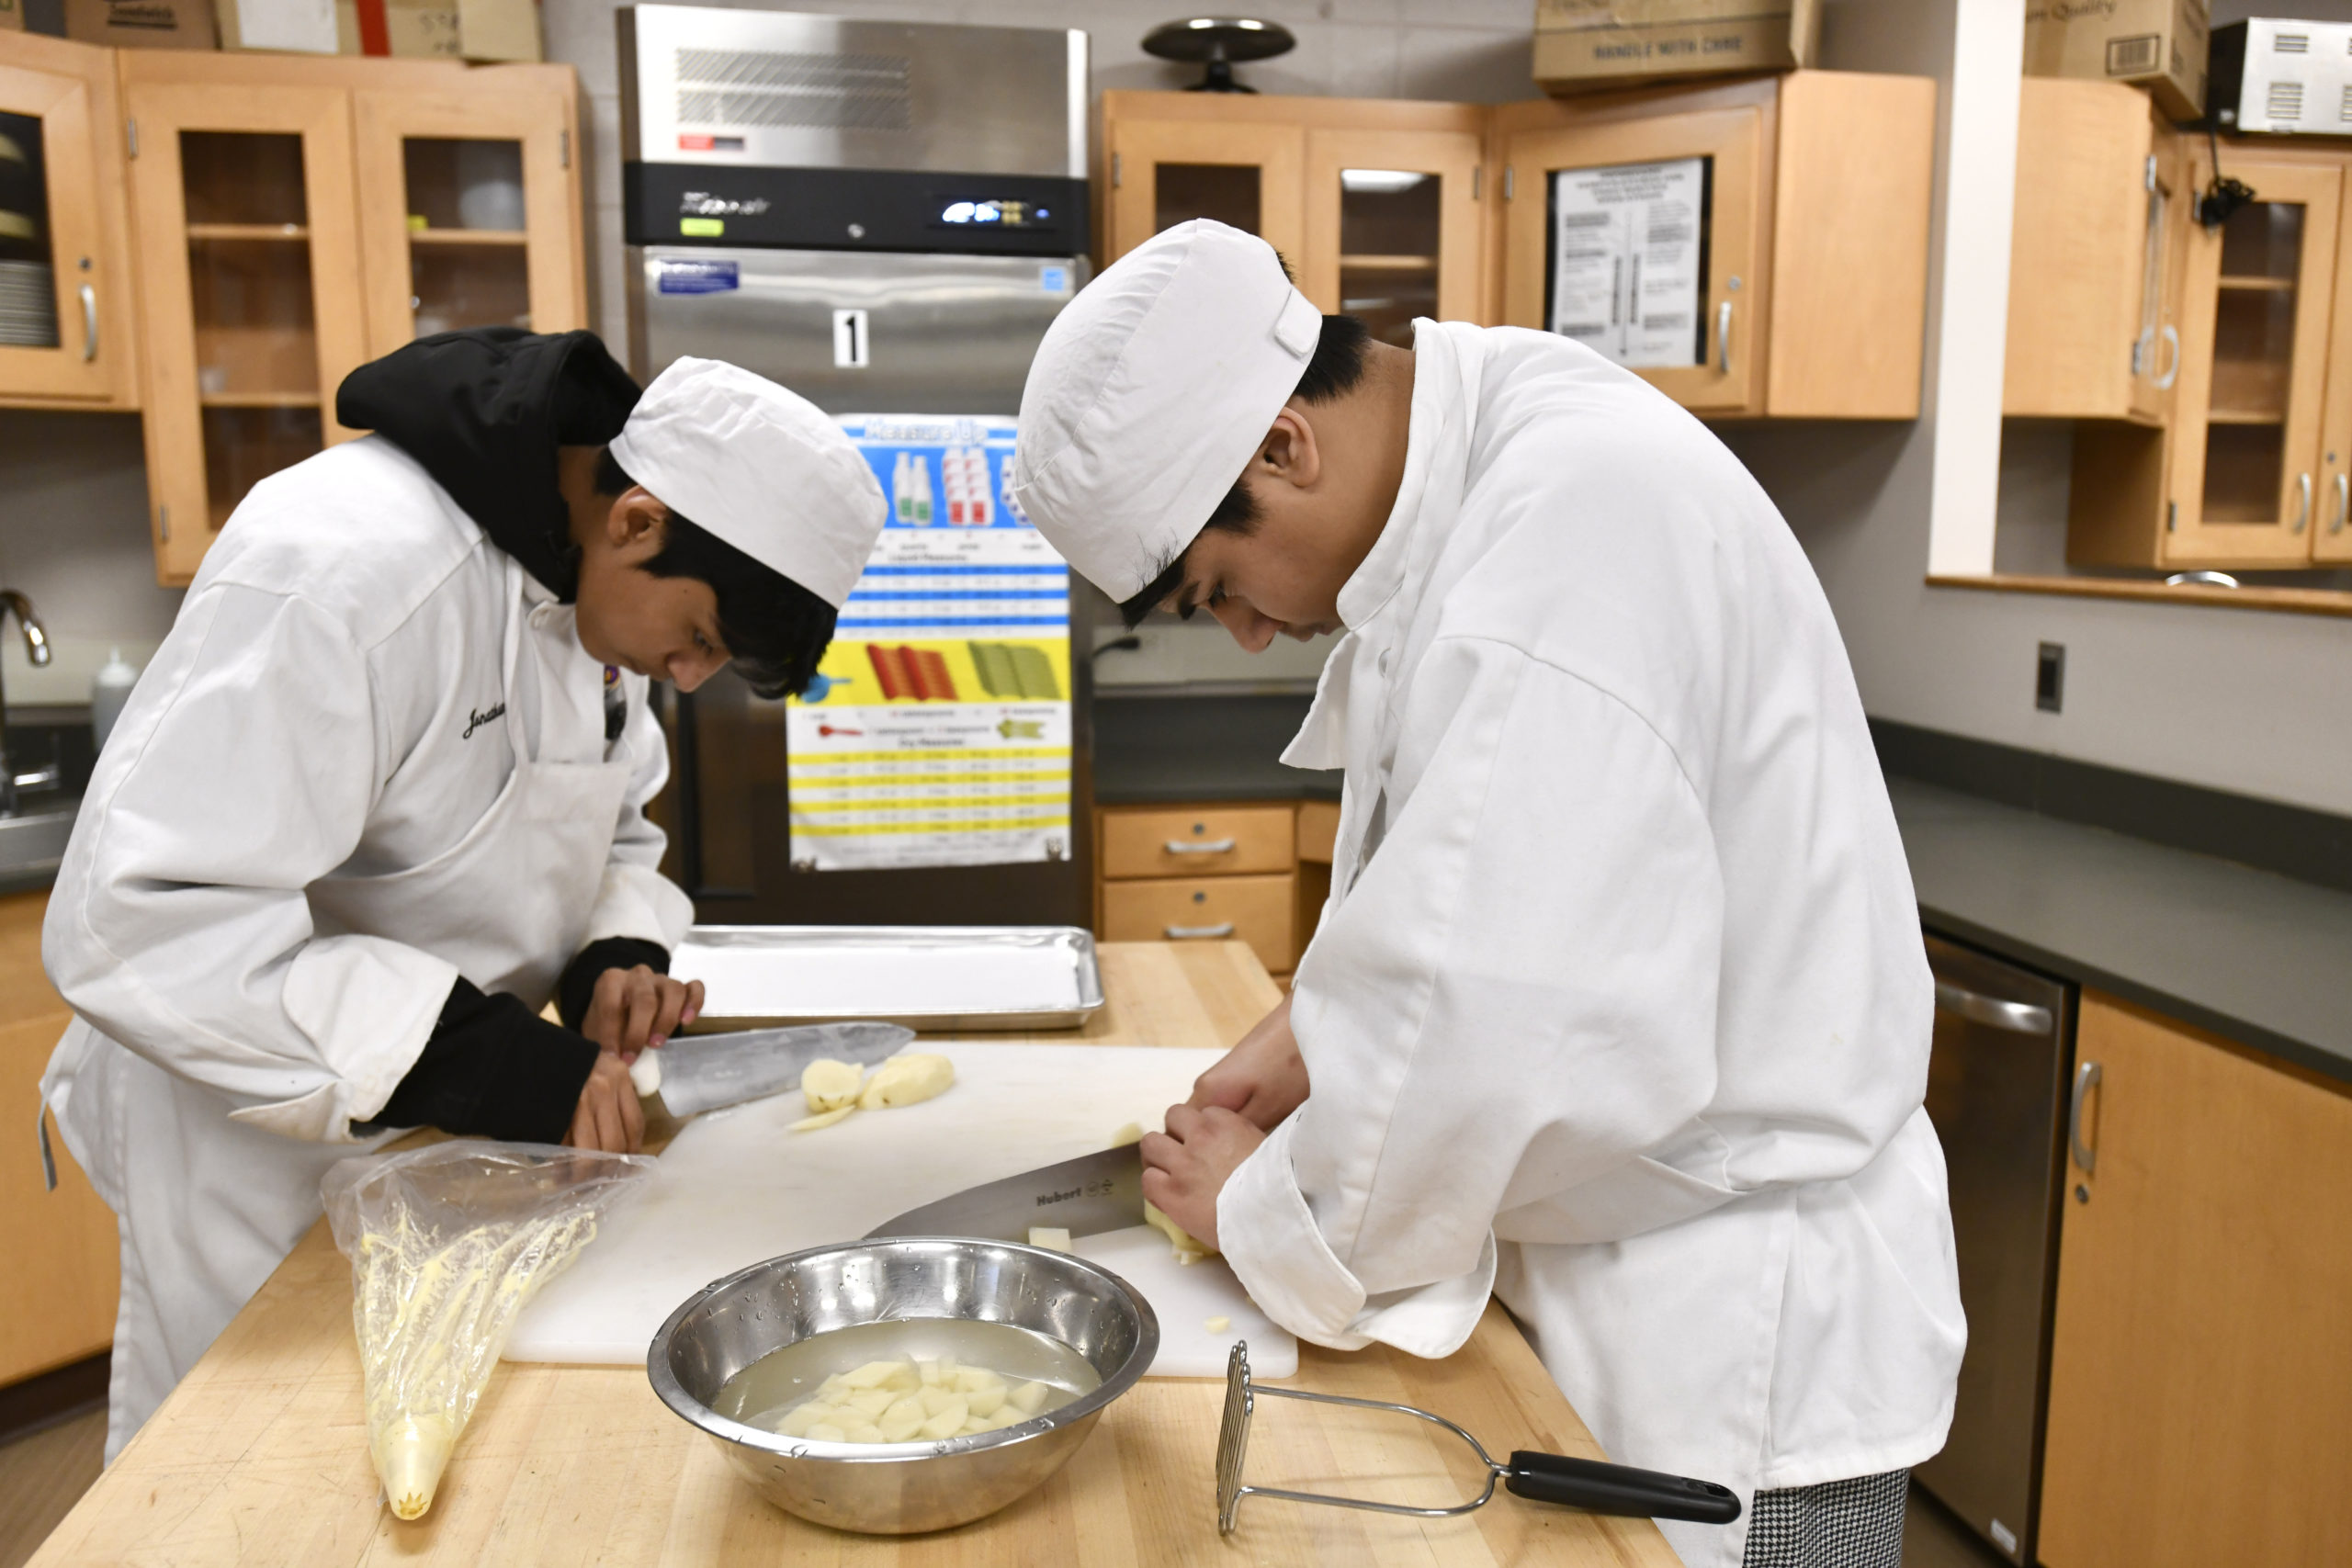 Students Andrew Avila and Jonathan Aquilar at work in the kitchen during the culinary class at Hampton Bays High School.  DANA SHAW